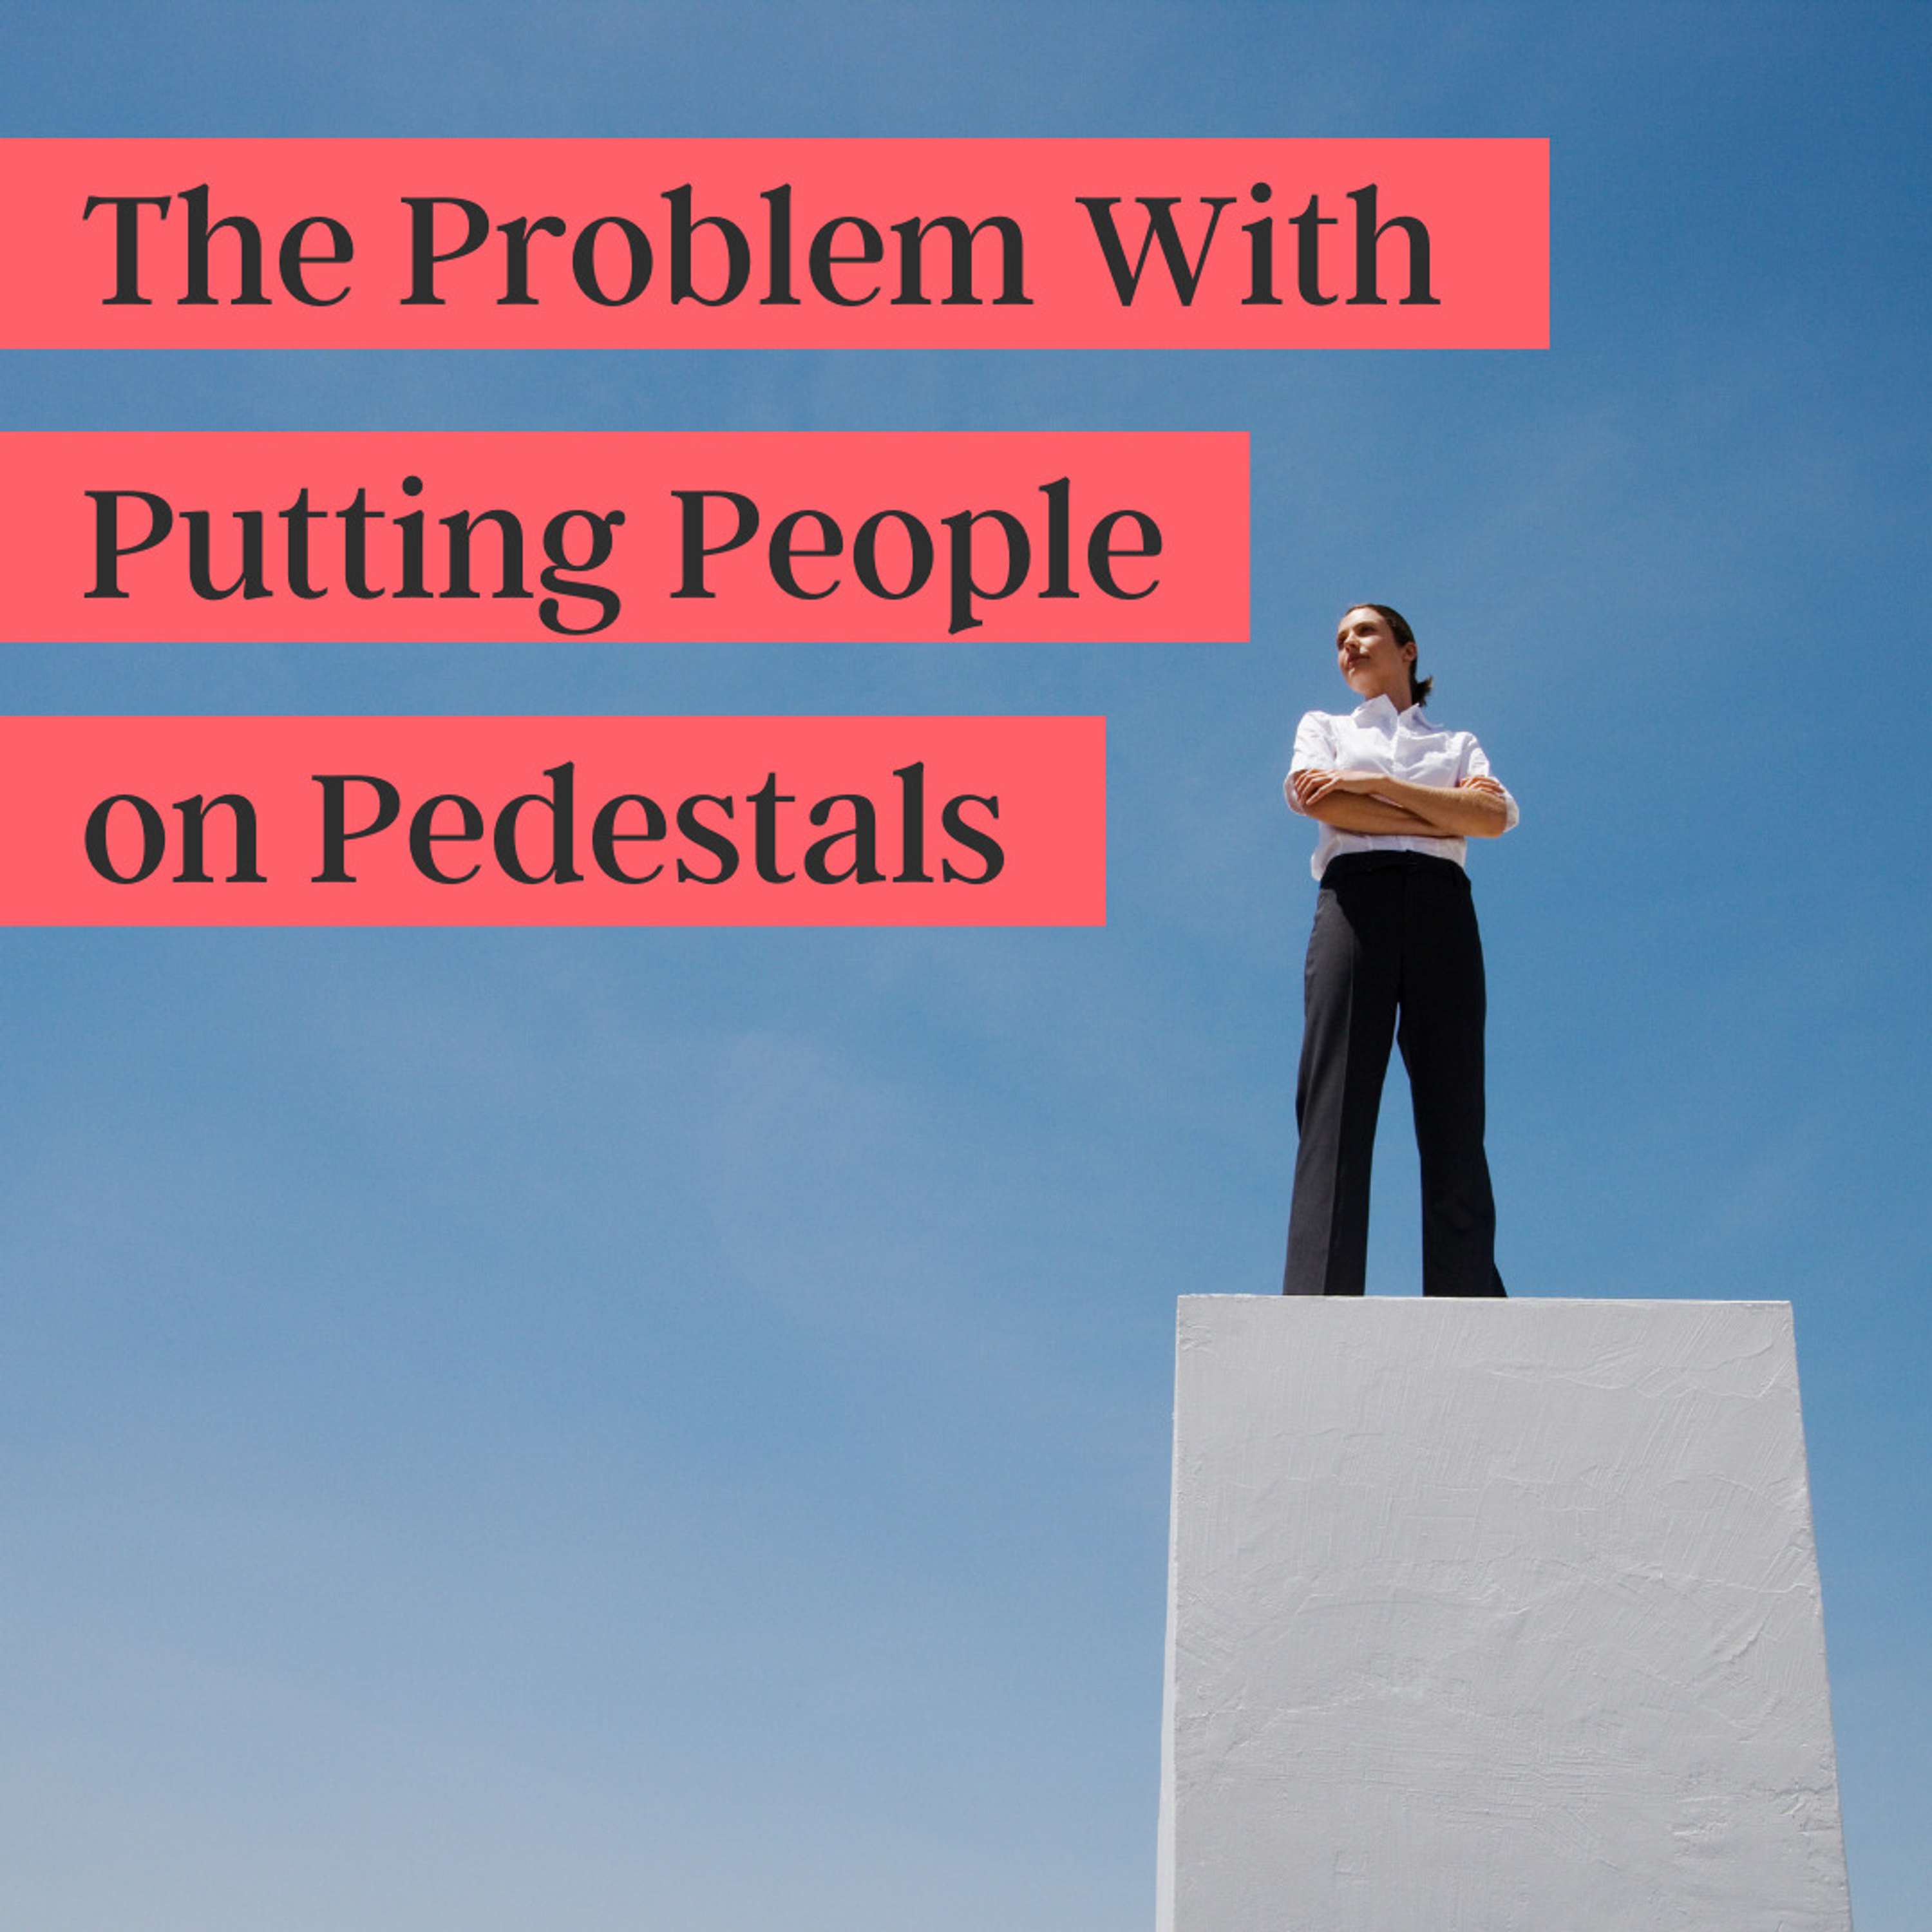 35. The Problem with Putting People on Pedestals